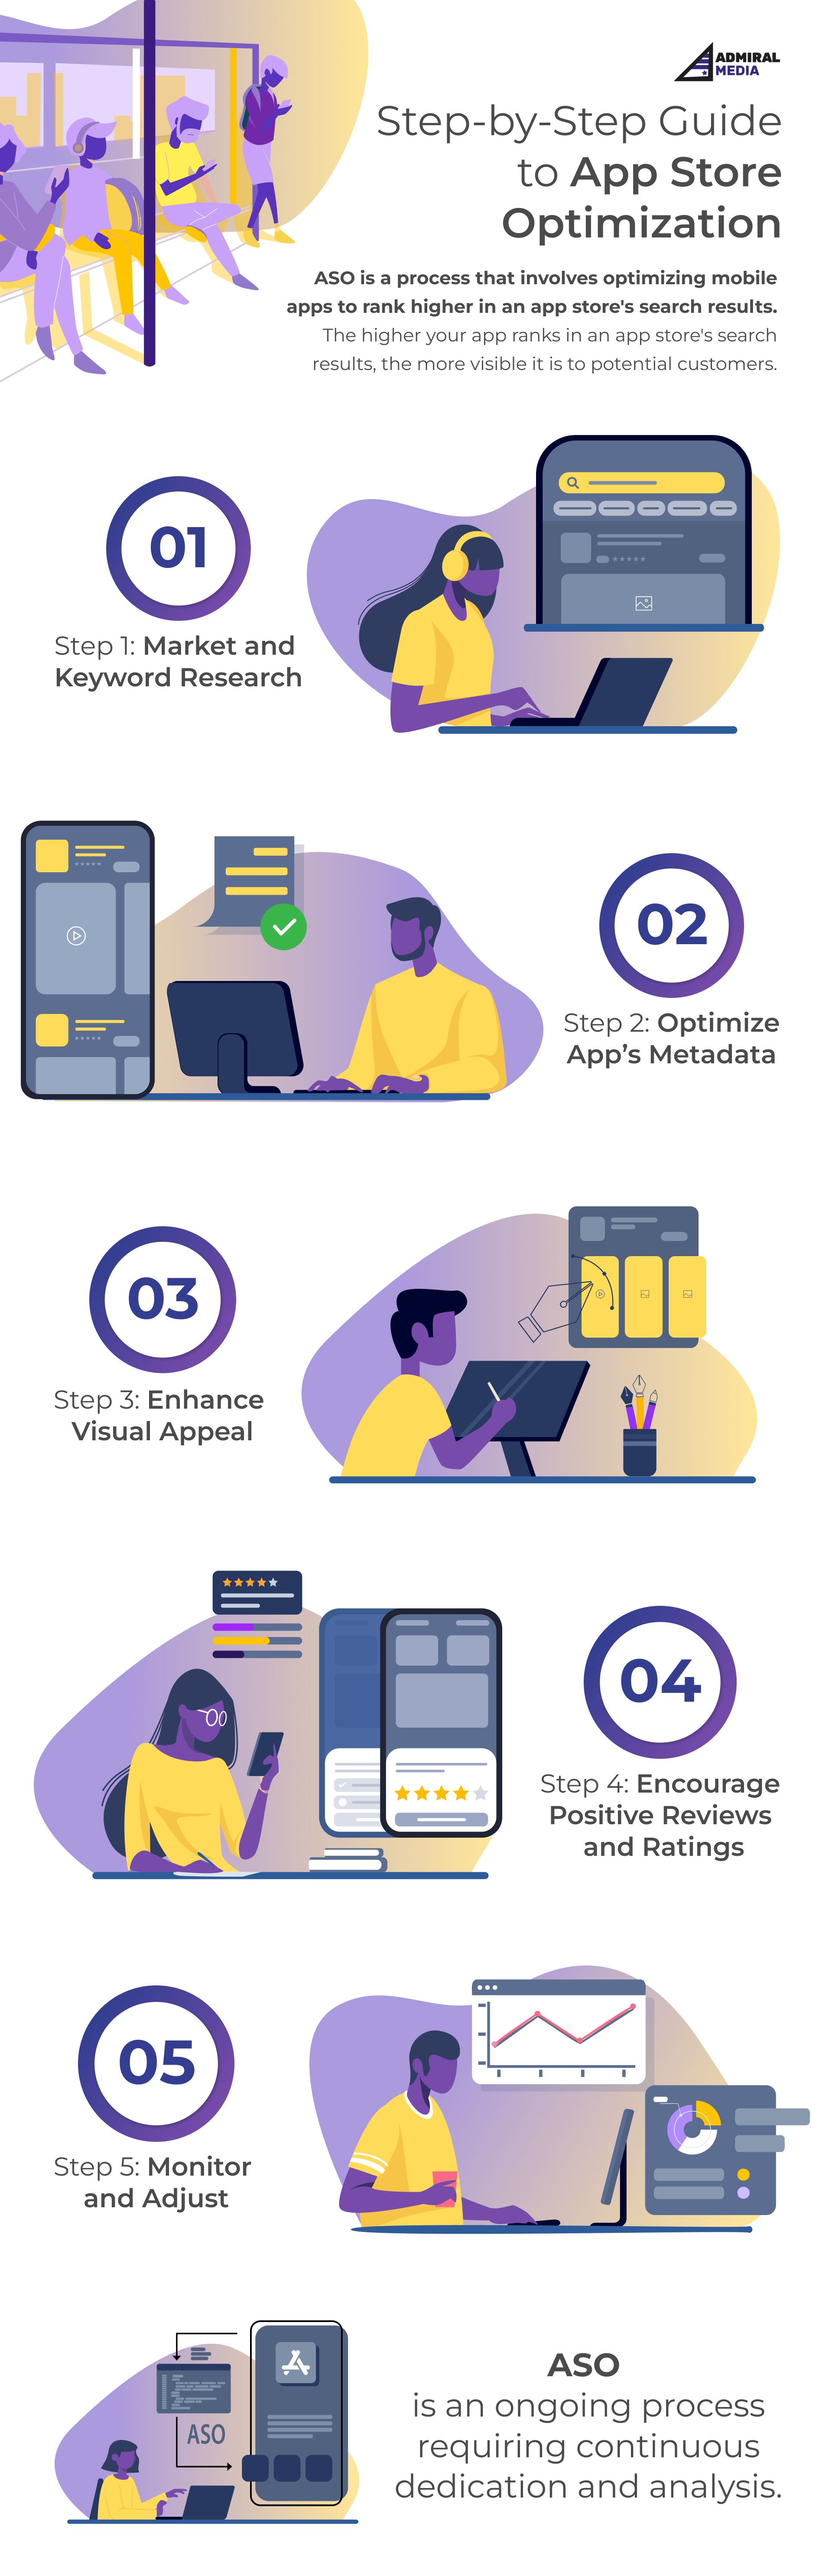 This infographic provides a step-by-step guide to App Store Optimization (ASO). It starts with understanding what ASO is - a process of improving app's visibility and conversion rates in the app store. The first step in the process is researching and choosing the right keywords to use in the app's title and description. The infographic then details the importance of having an engaging app icon, screenshots and preview videos to attract users. It also highlights the need for a compelling app description, and emphasizes on localizing your app for various markets to enhance visibility. The next step described is about increasing the number of positive reviews and ratings. The infographic concludes with the necessity of regularly updating the app to keep it relevant and competitive